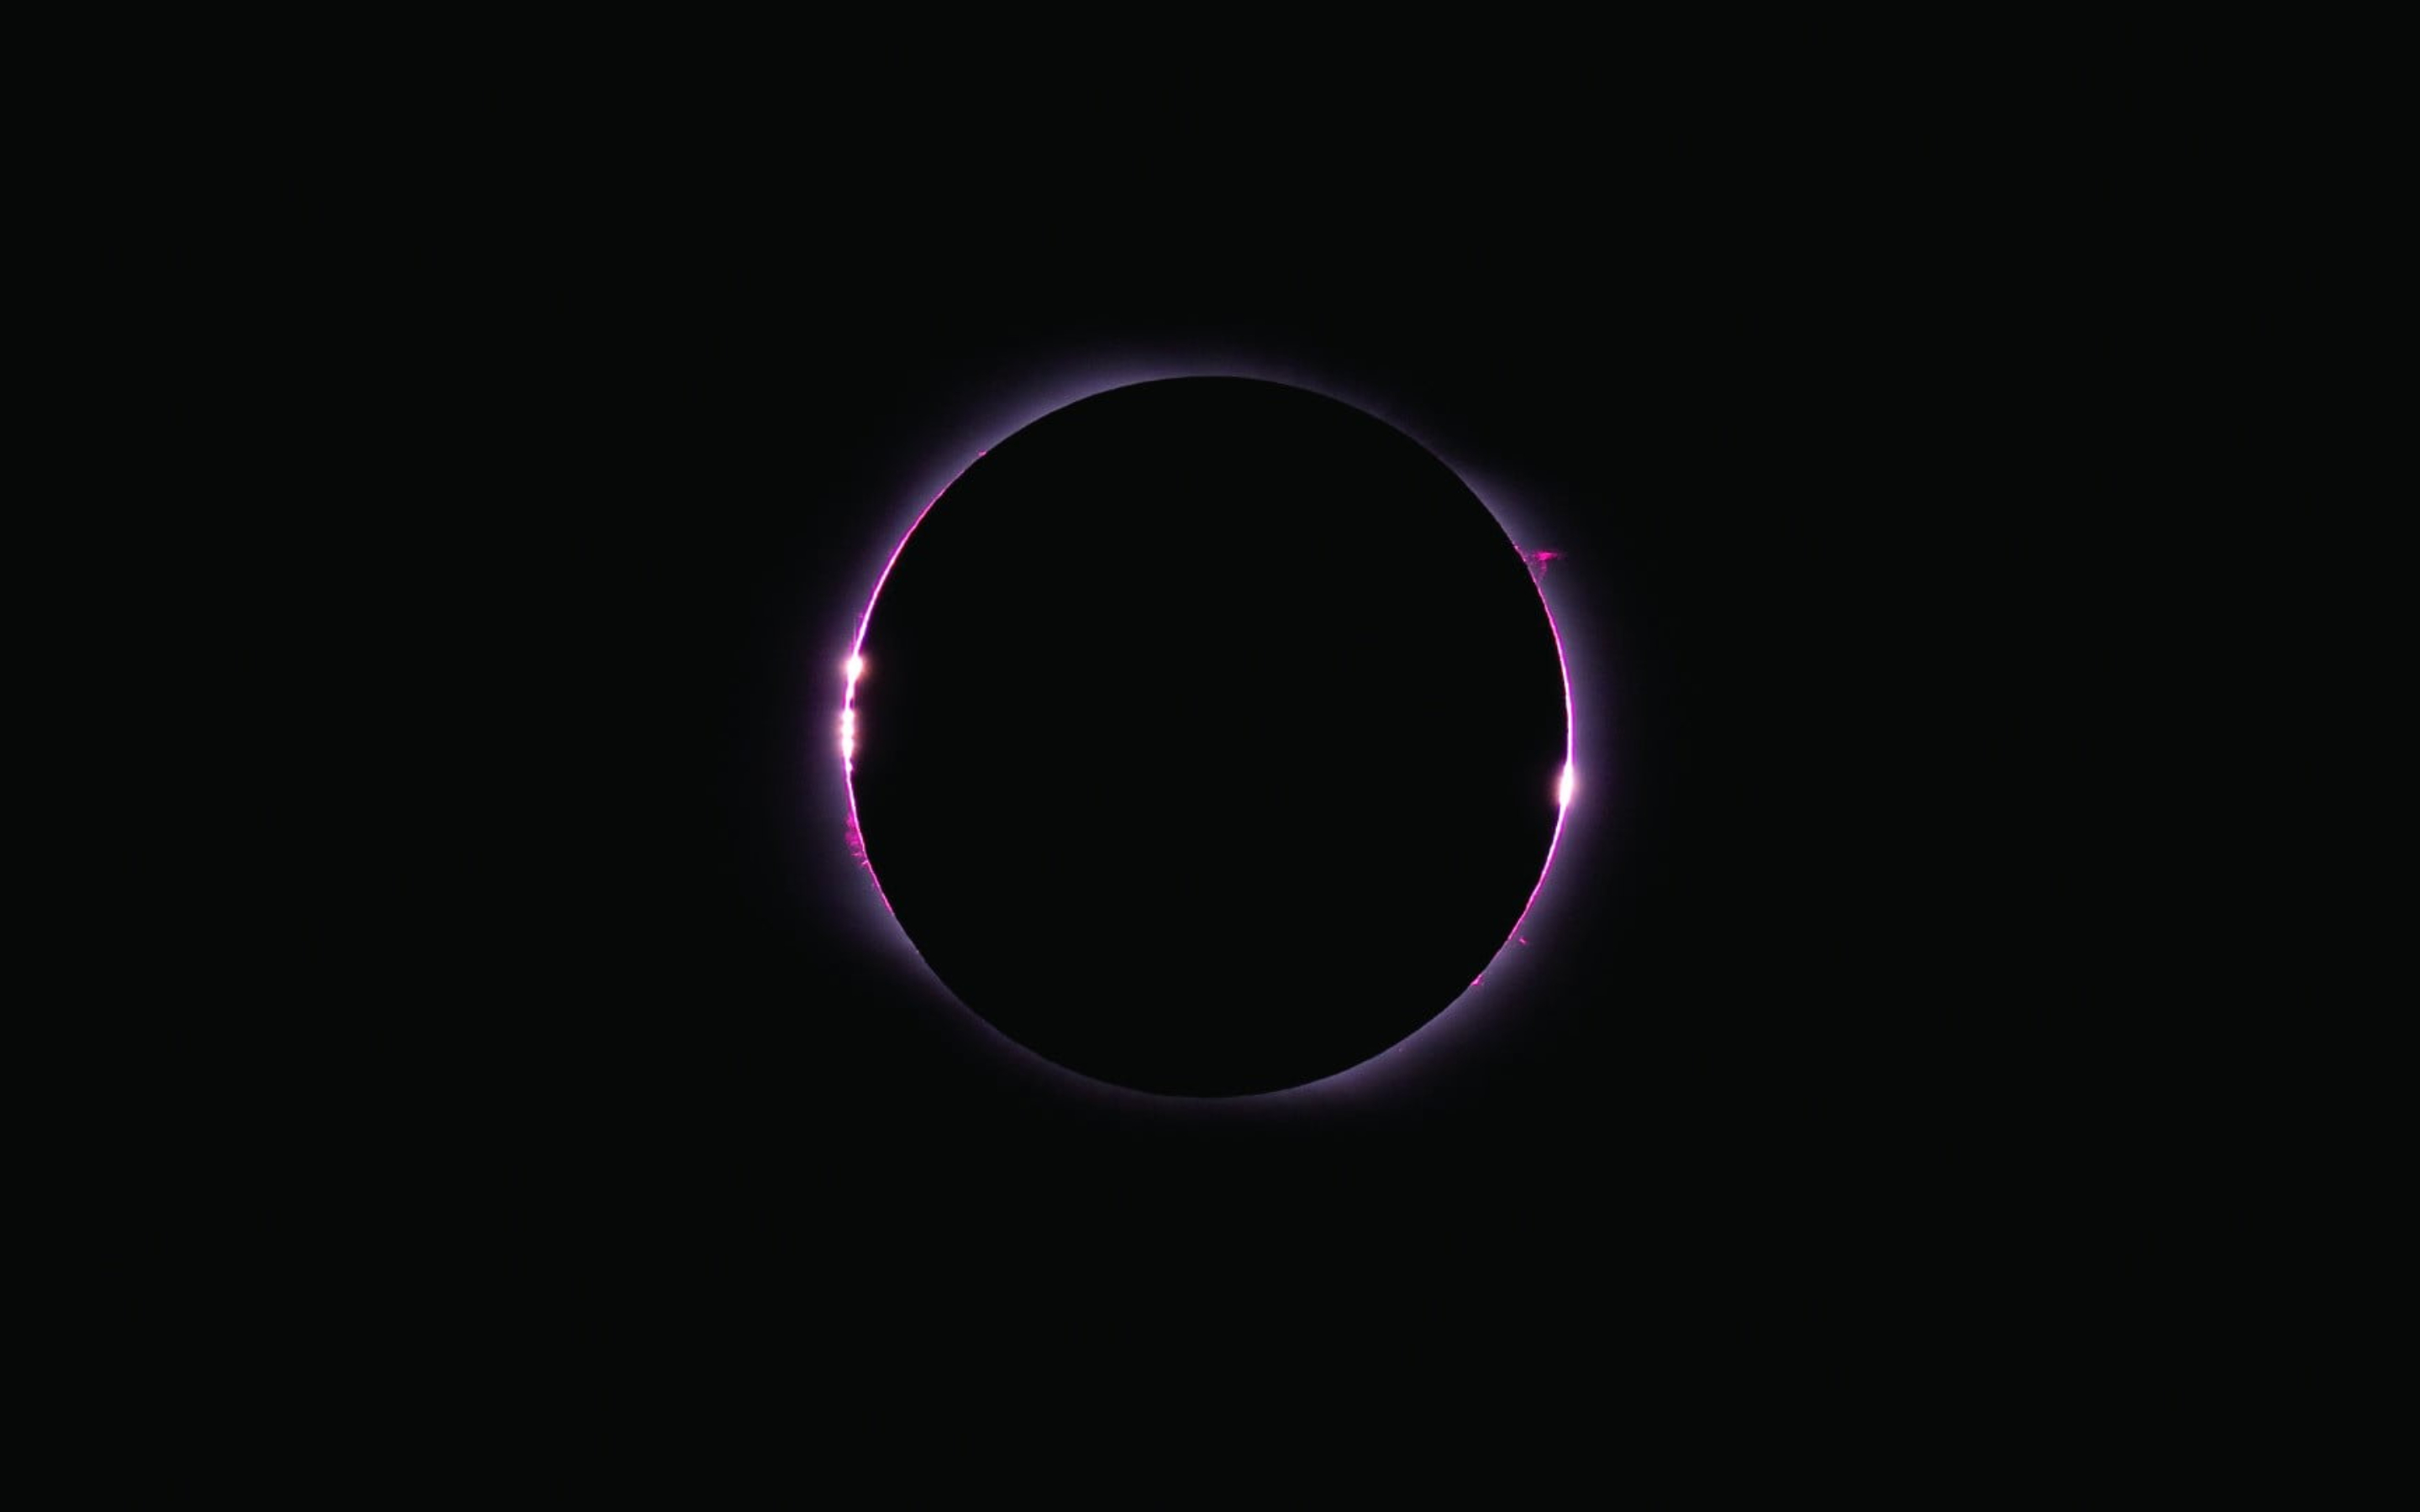 General 2880x1800 minimalism black space solar eclipse Baily's beads digital art simple background